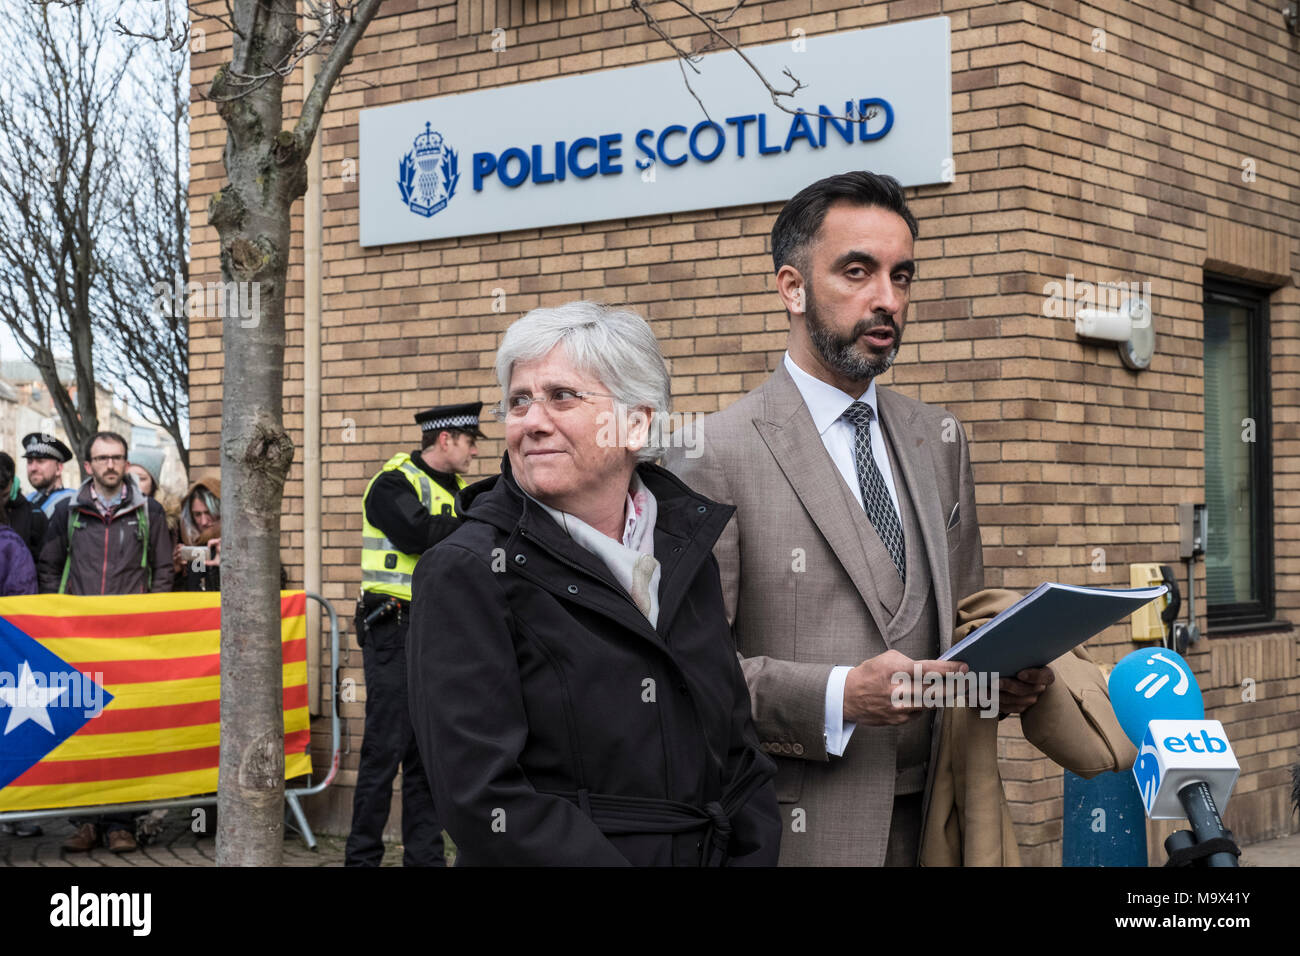 Edinburgh, Scotland,UK. 28 March 2018.  former Catalonia Education Minister and independence supporter Clara Ponsati with lawyer Aamer Anwar, outside St Leonards police station in Edinburgh prior to being issued European arrest warrant. Ponsati faces extradition to Spain Stock Photo